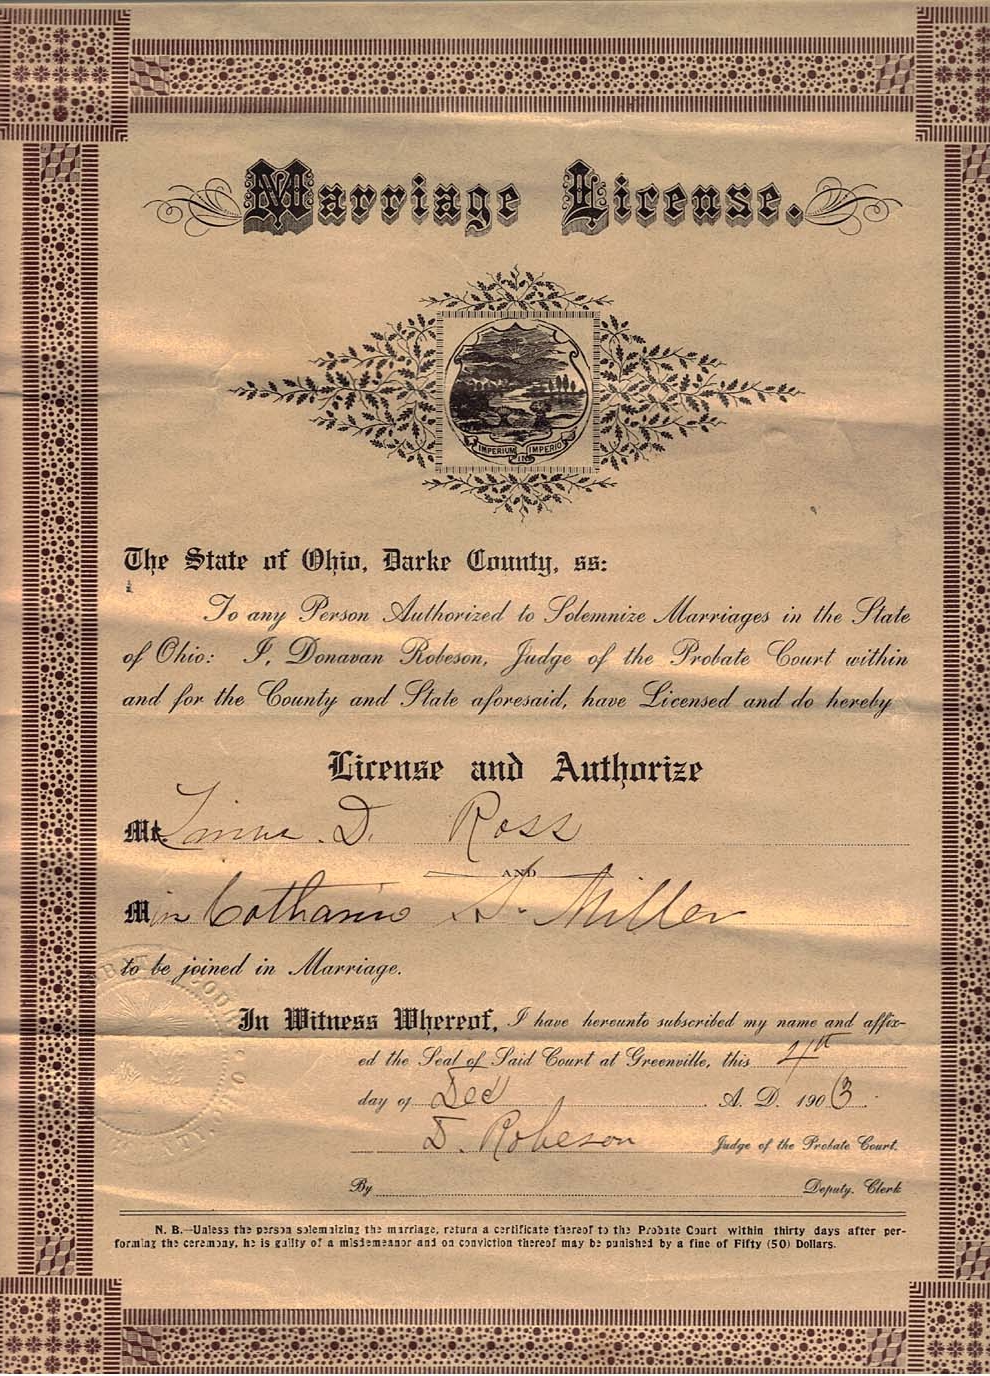 Marriage Certificate of I1 Catherine S. Miller & Linus D. Ross